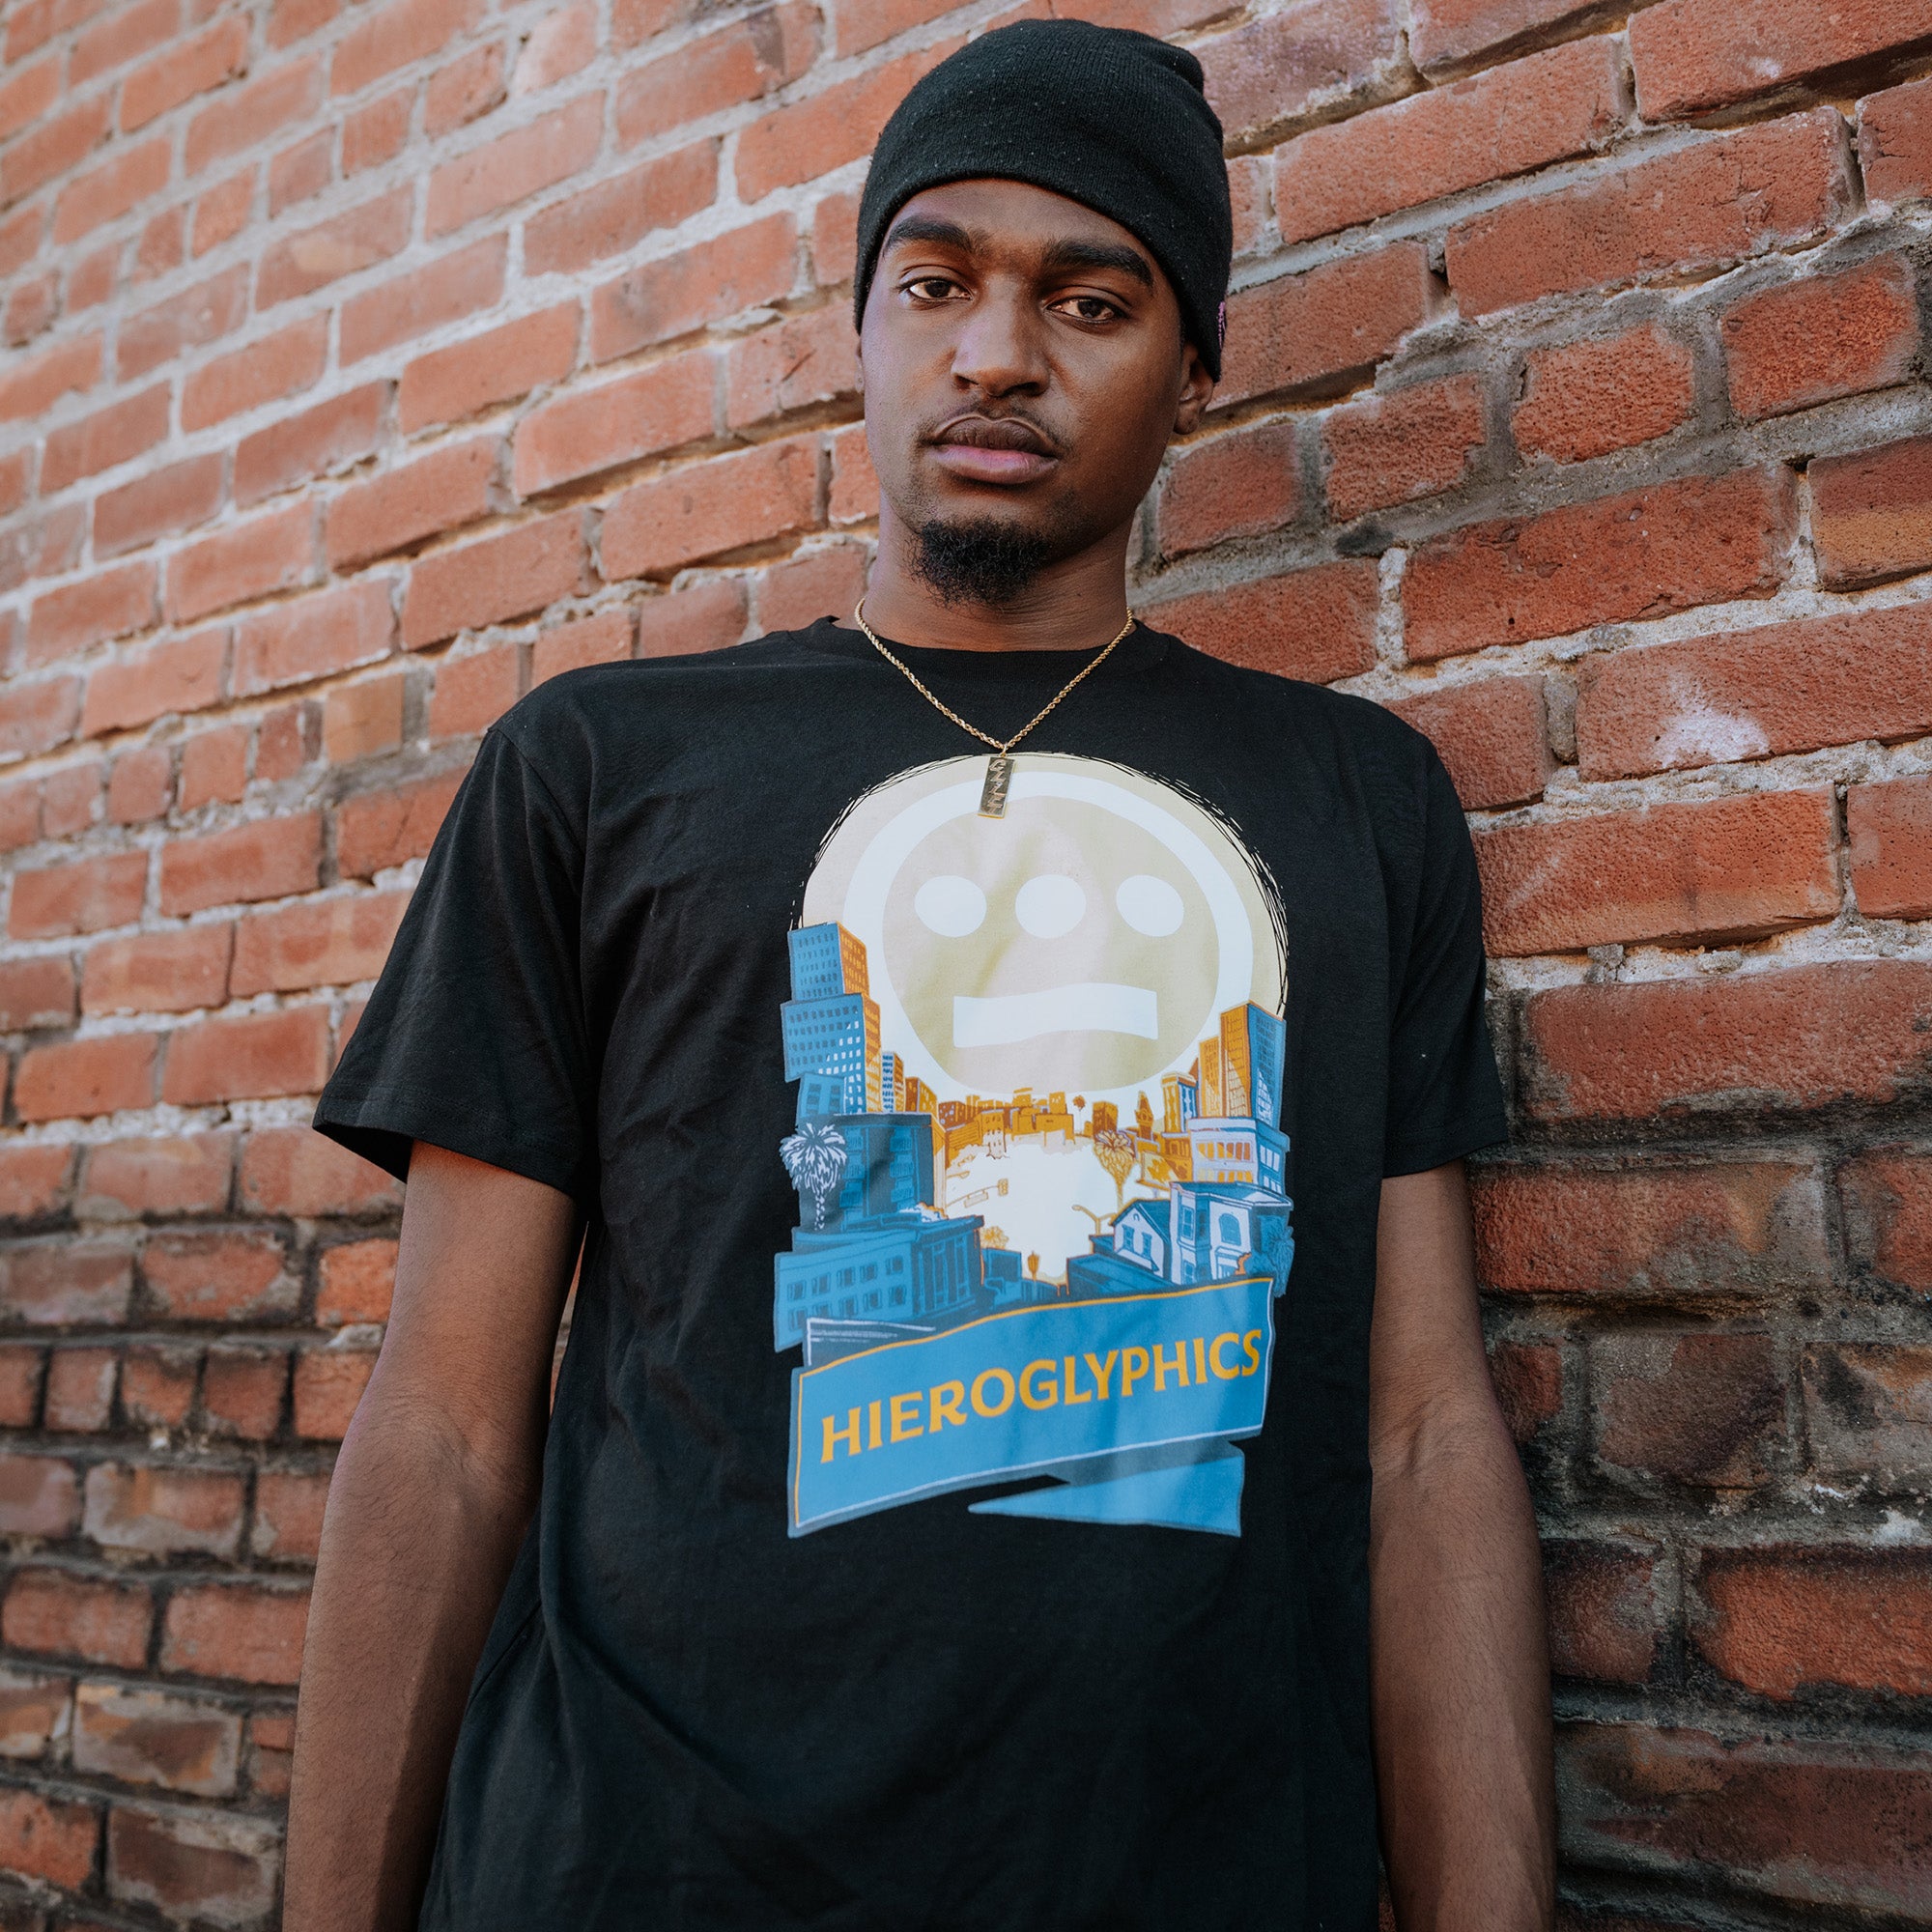 Model leaning against brick wall wearing a black t-shirt with Hiero Valley, Hieroglyphics Hip Hop Graphic on the front chest.